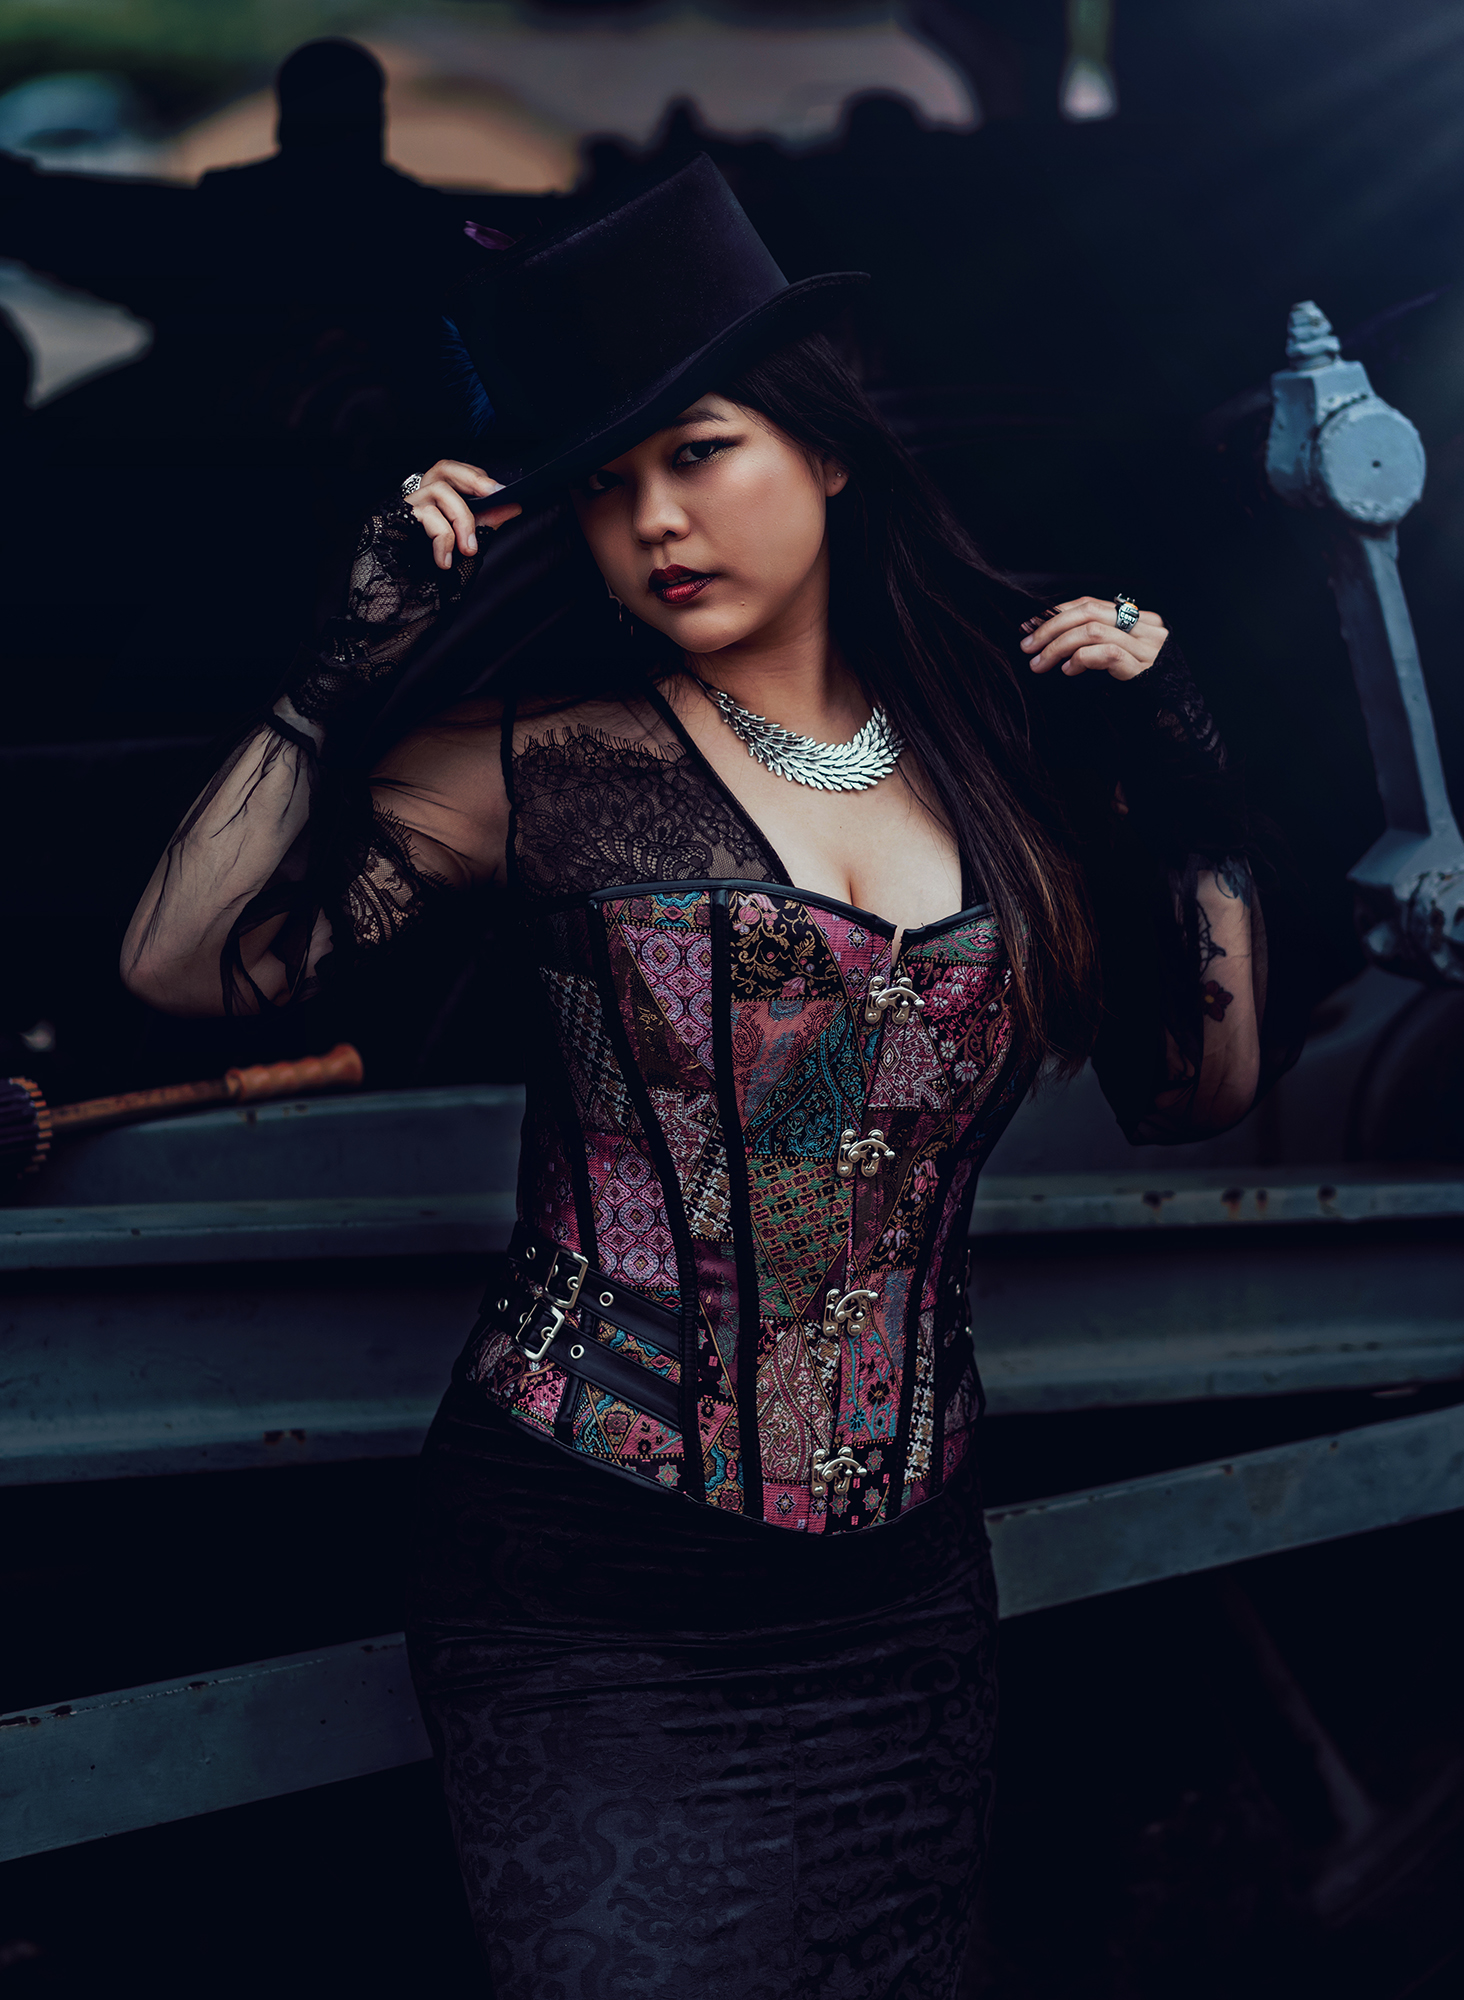 A woman wearing a top hat and colorful corset for a steampunk style photo by Kendra Colleen Photography in Denver Colorado